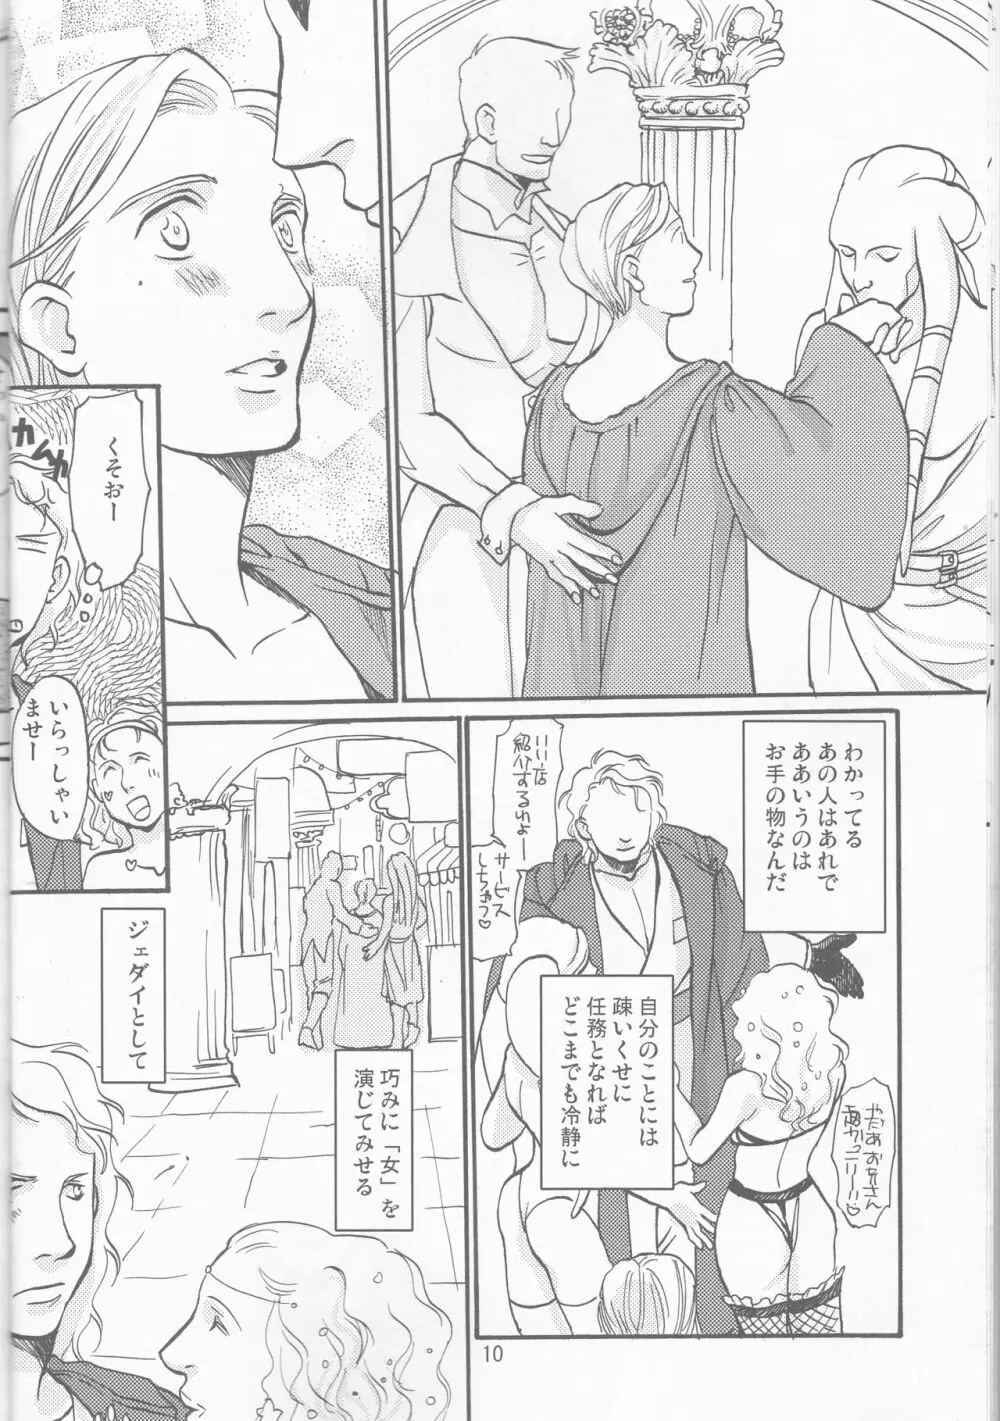 Obi Female Transformation Book 1 of 2 - page10